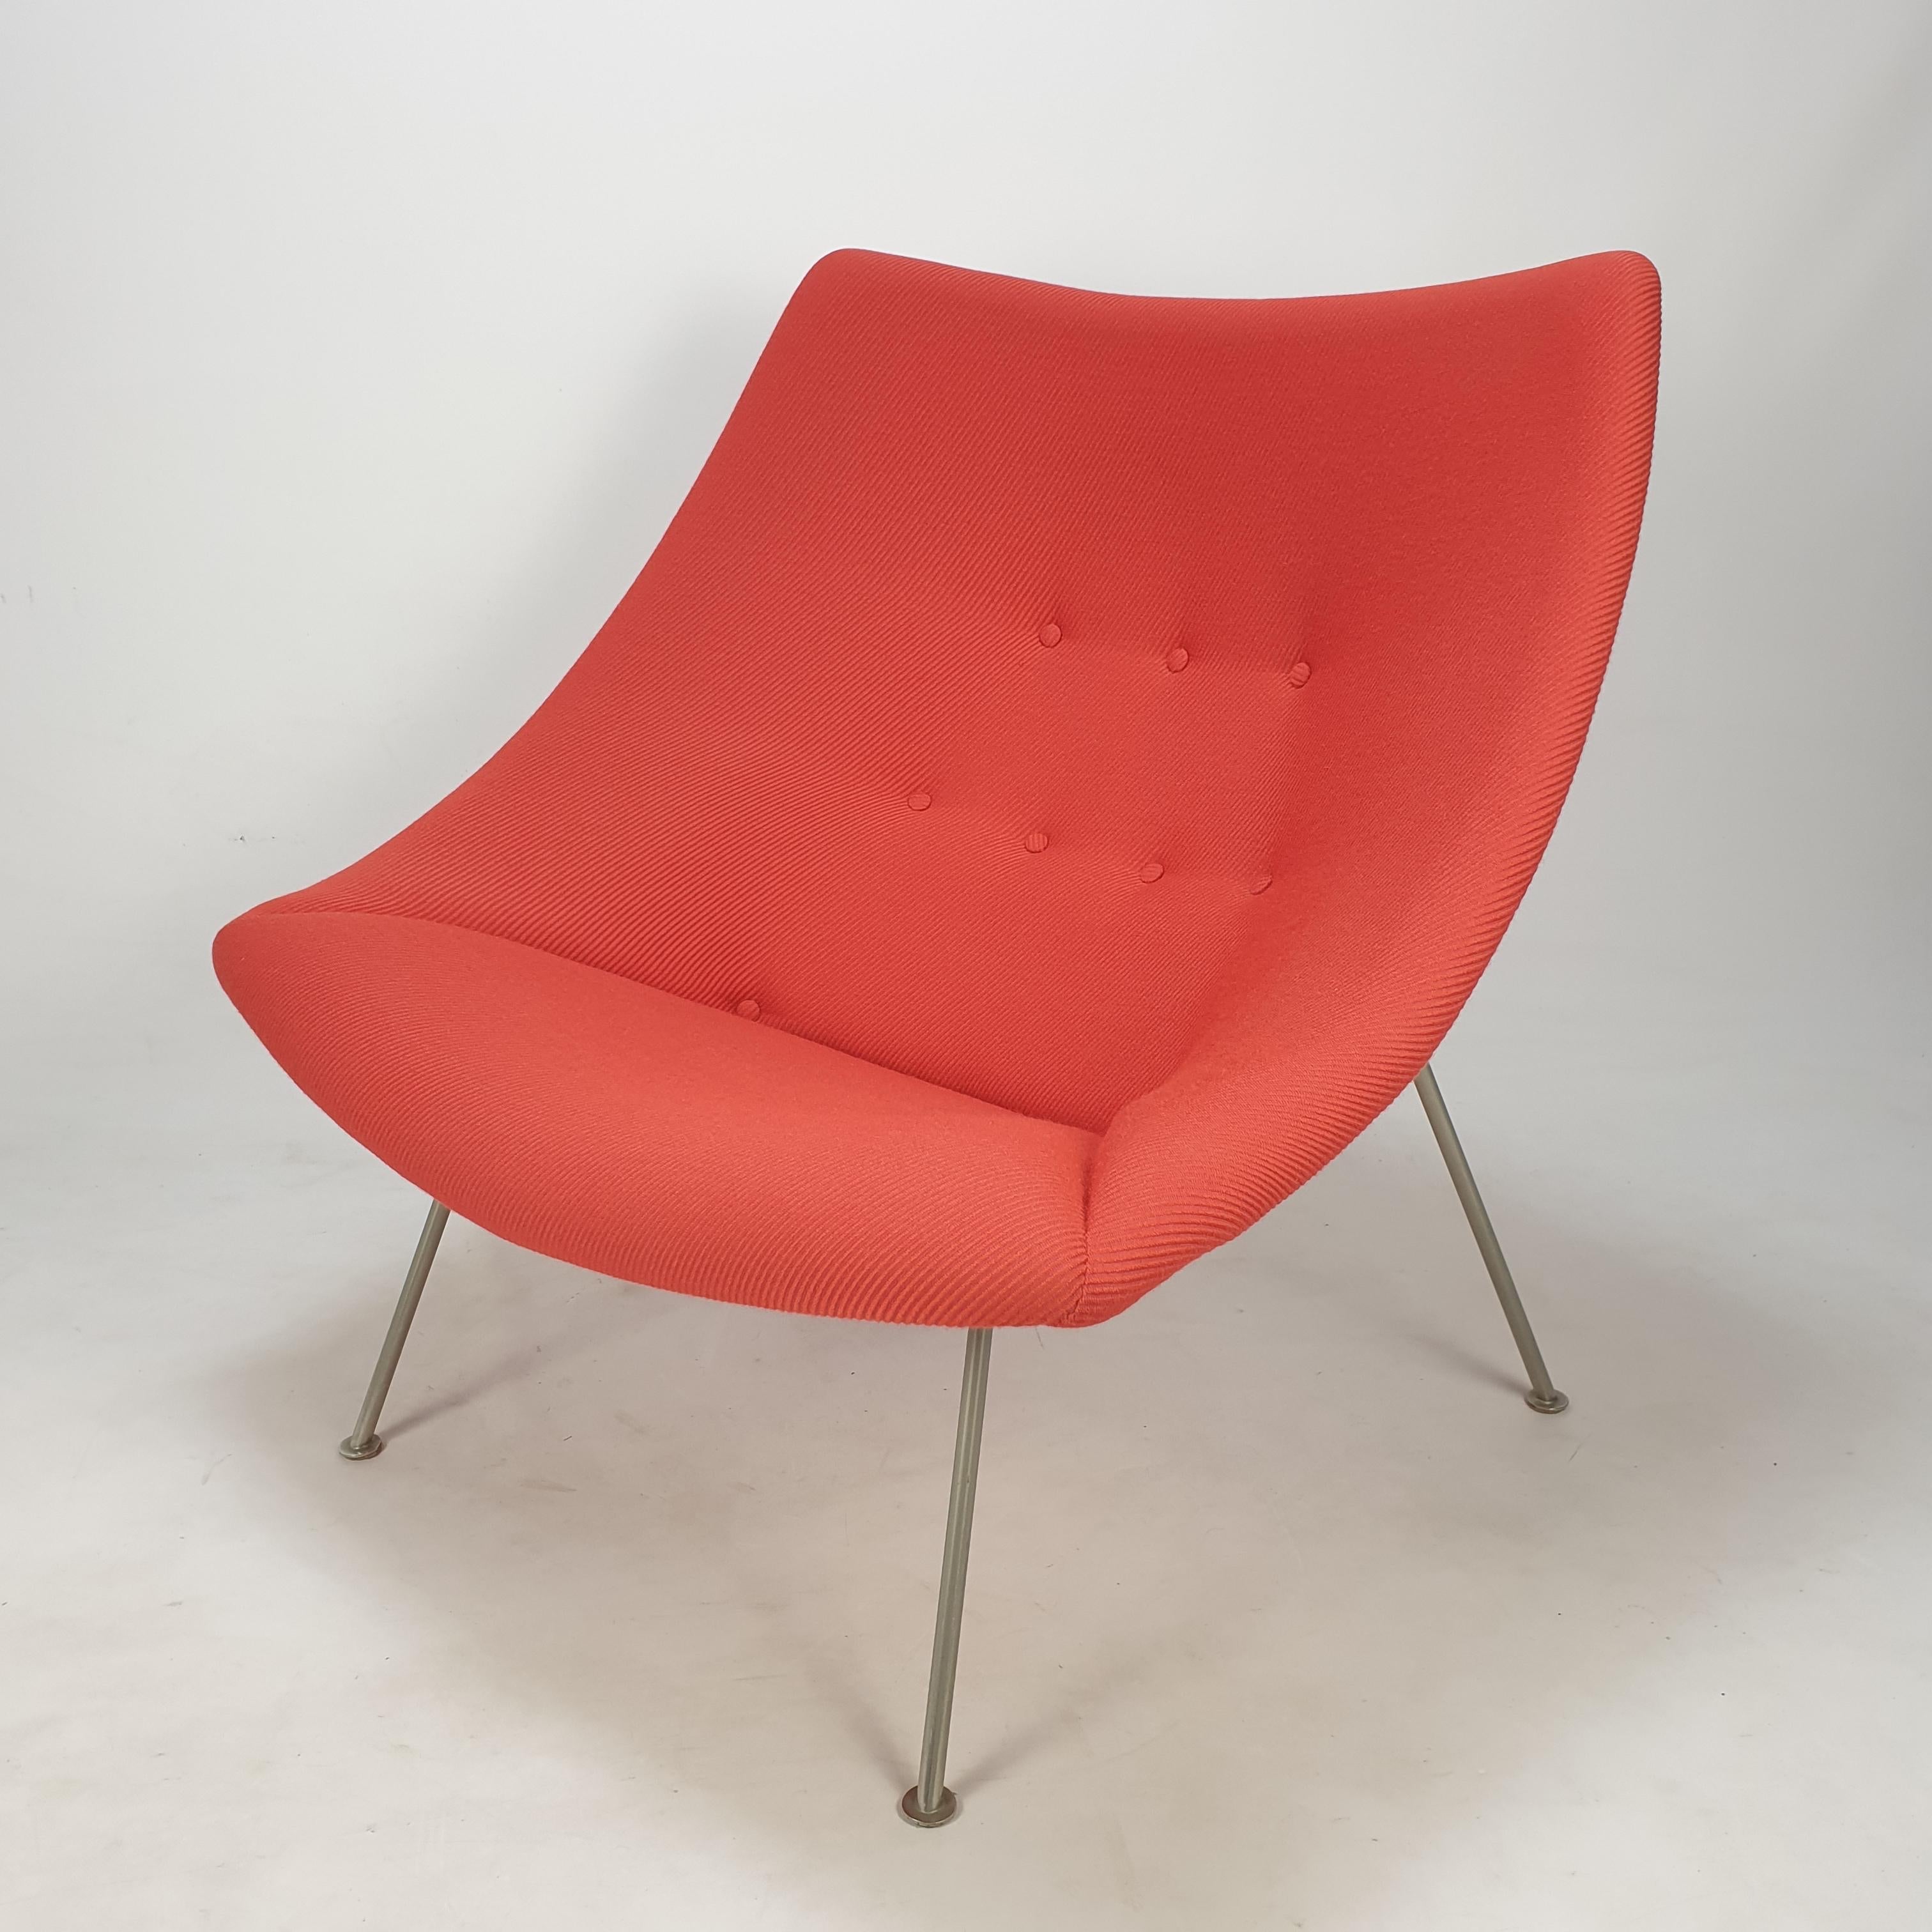 The famous Artifort oyster chair by Pierre Paulin, the big model. 

Designed and manufactured in the beginning of the 60's, it's a first edition with nickeled metal legs.

It has been reupholstered 10 years ago and the wool fabric (De Ploeg) is